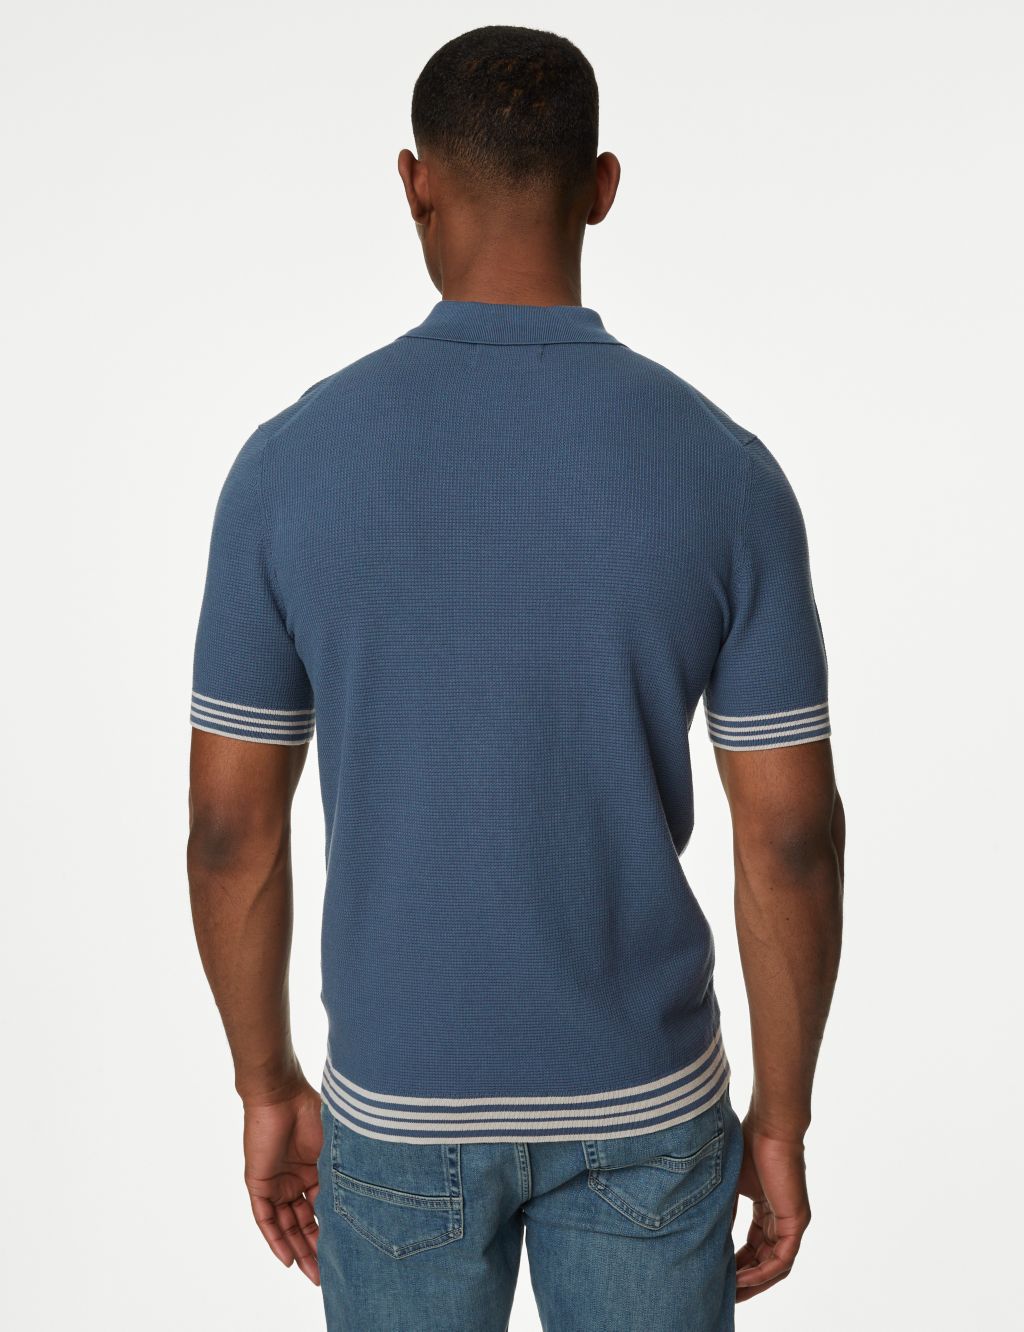 Cotton Blend Textured Knitted Polo Shirt image 5